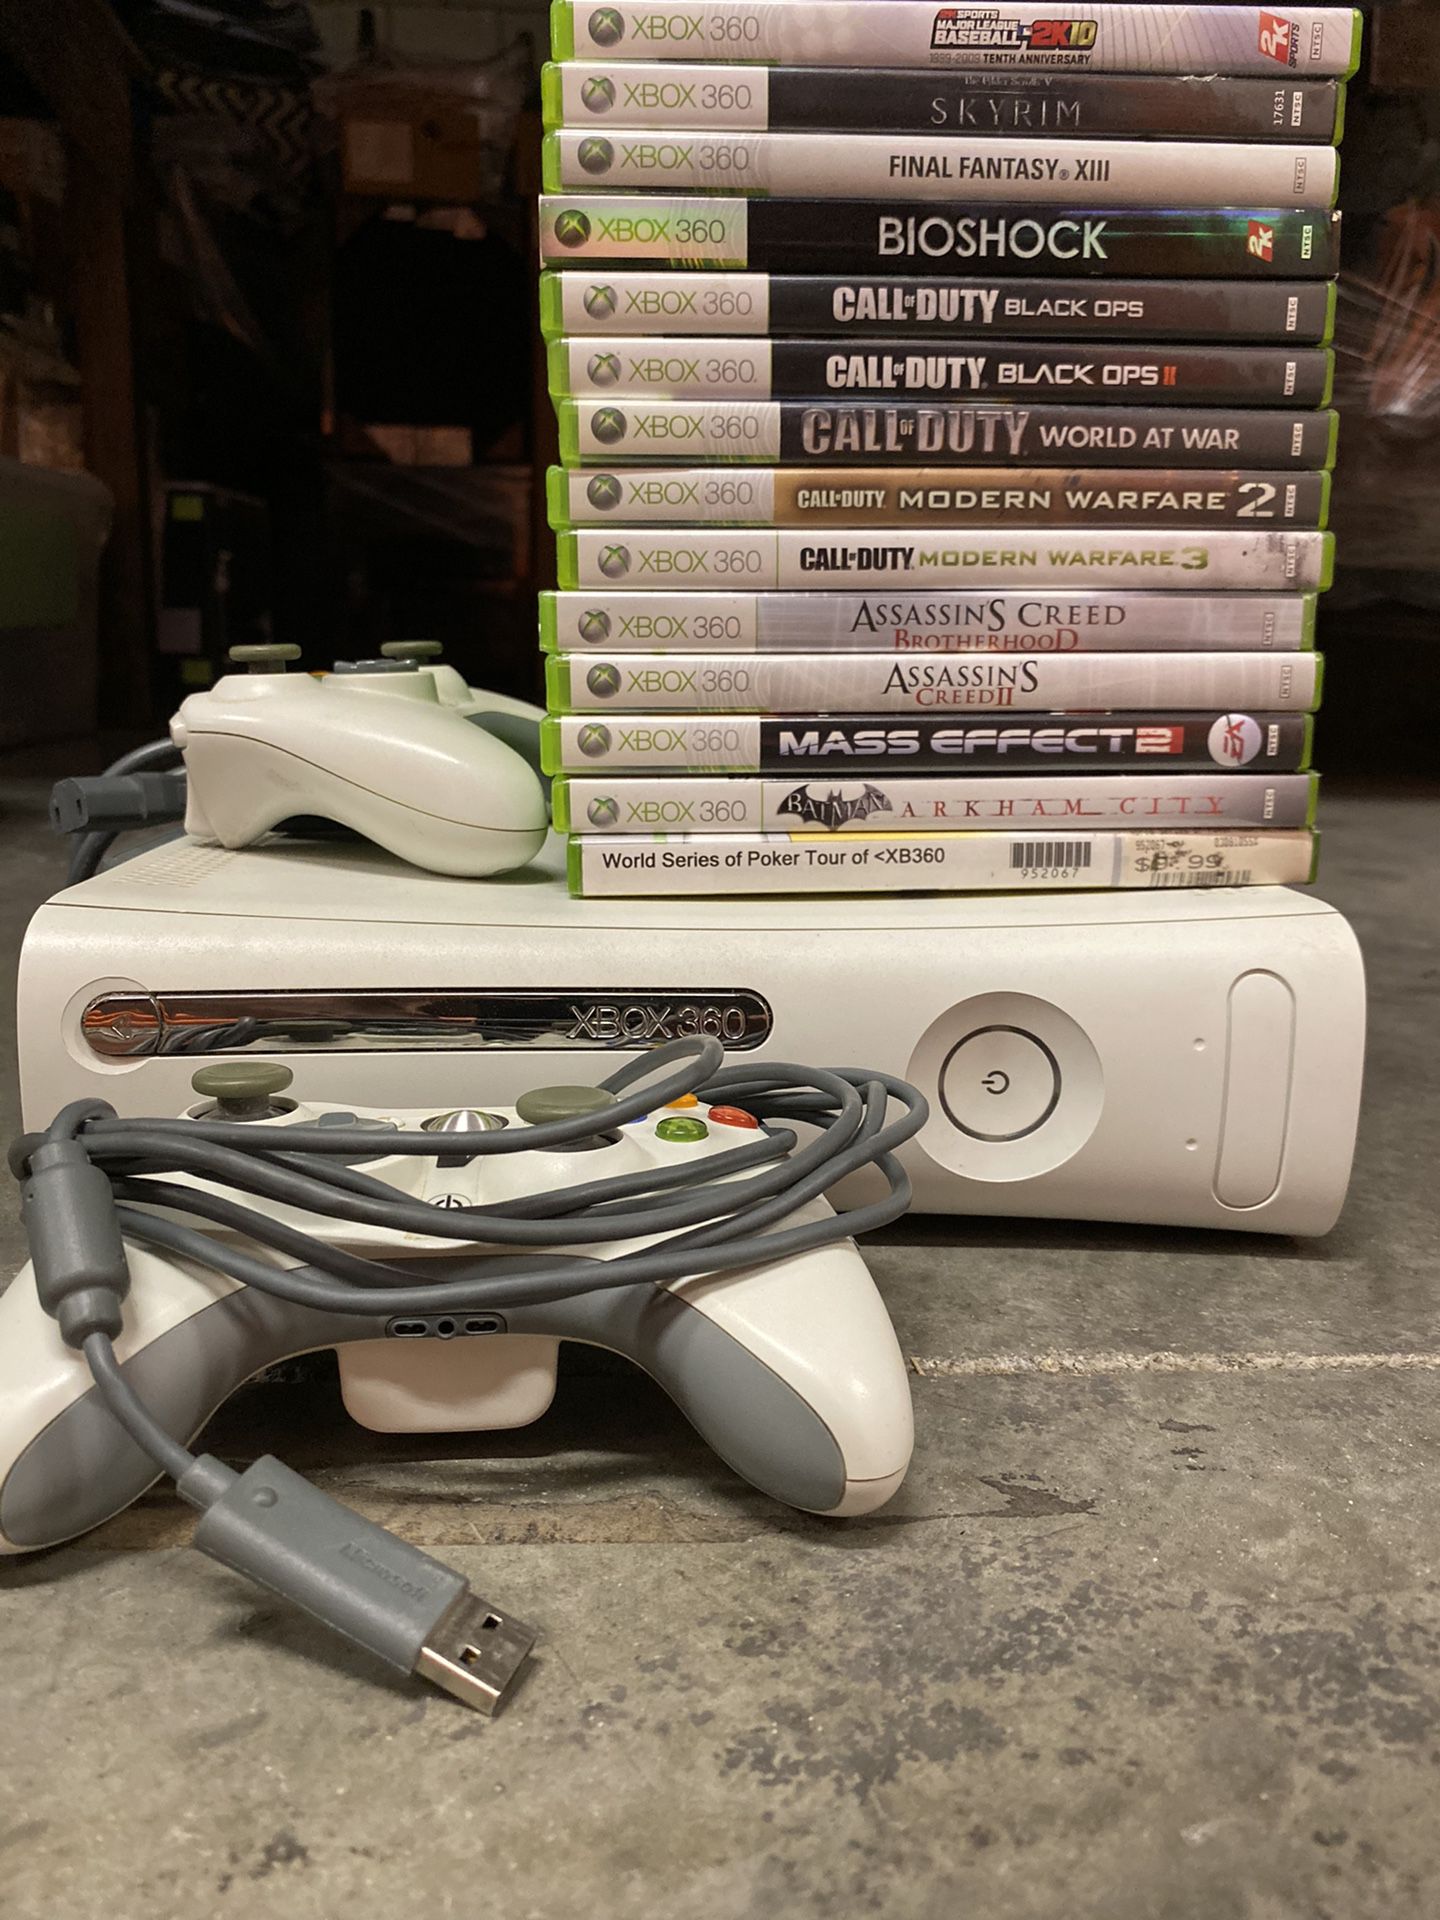 XBOX360 (FF13 collector edition console) w/ 2 controllers & 14 Games